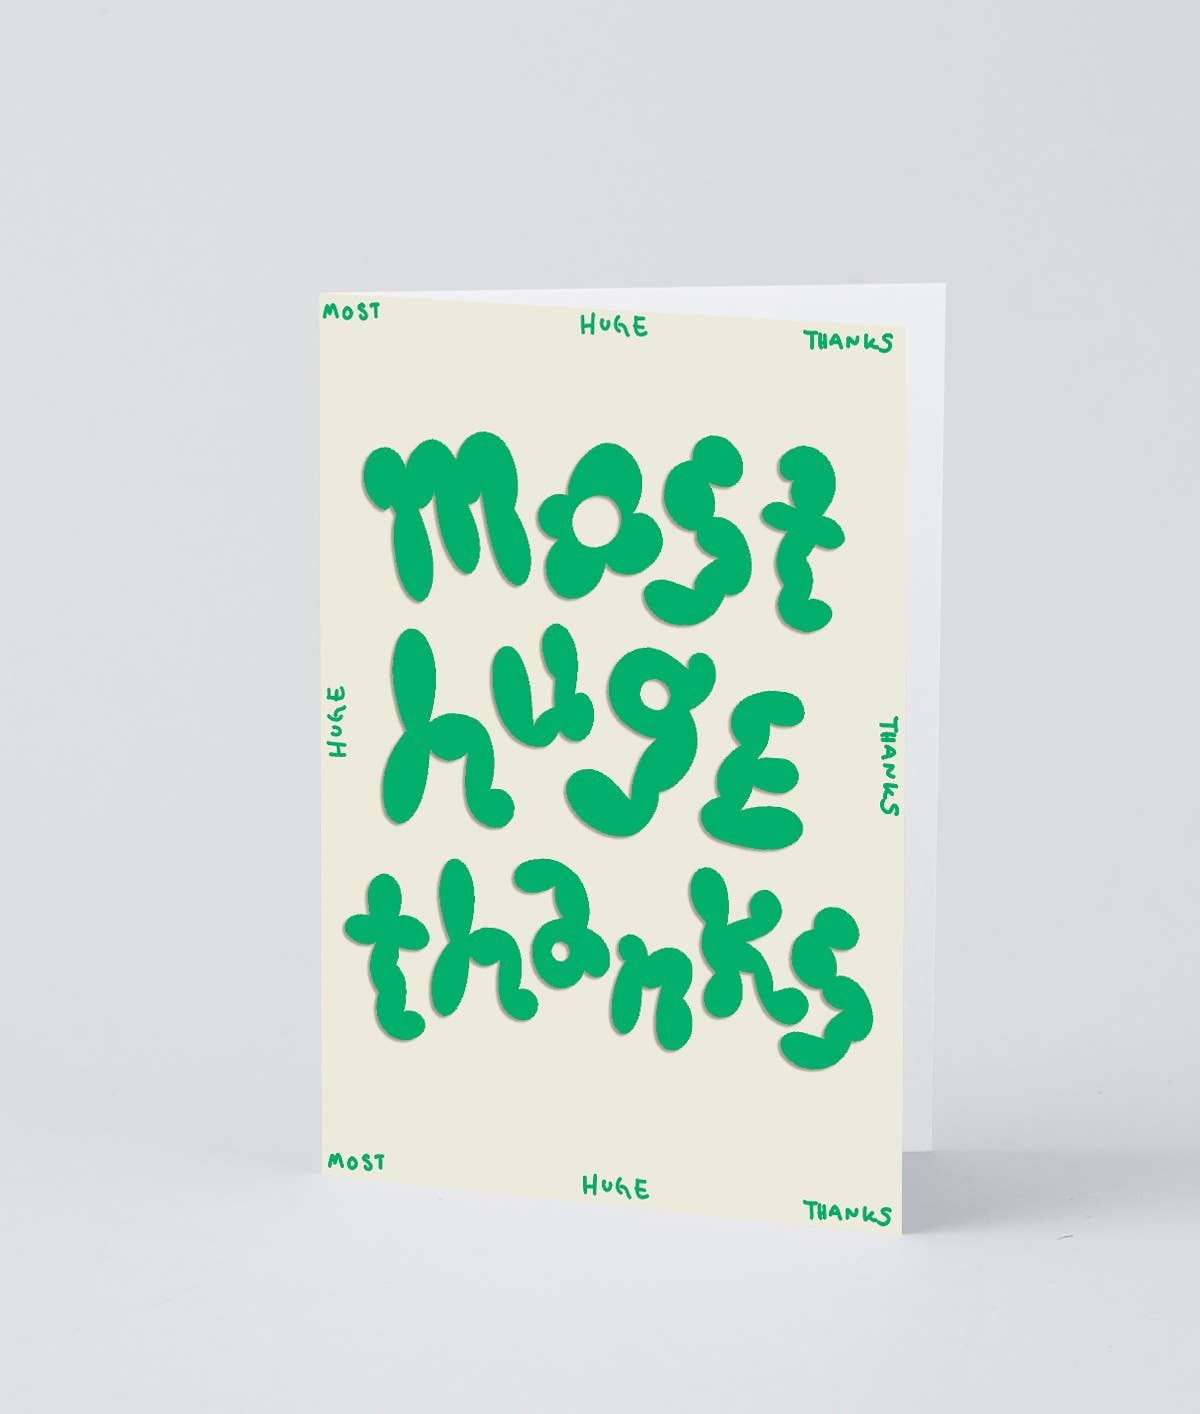 Wrap - 'Most Huge Thanks' Embossed Greetings Card - Preston Apothecary